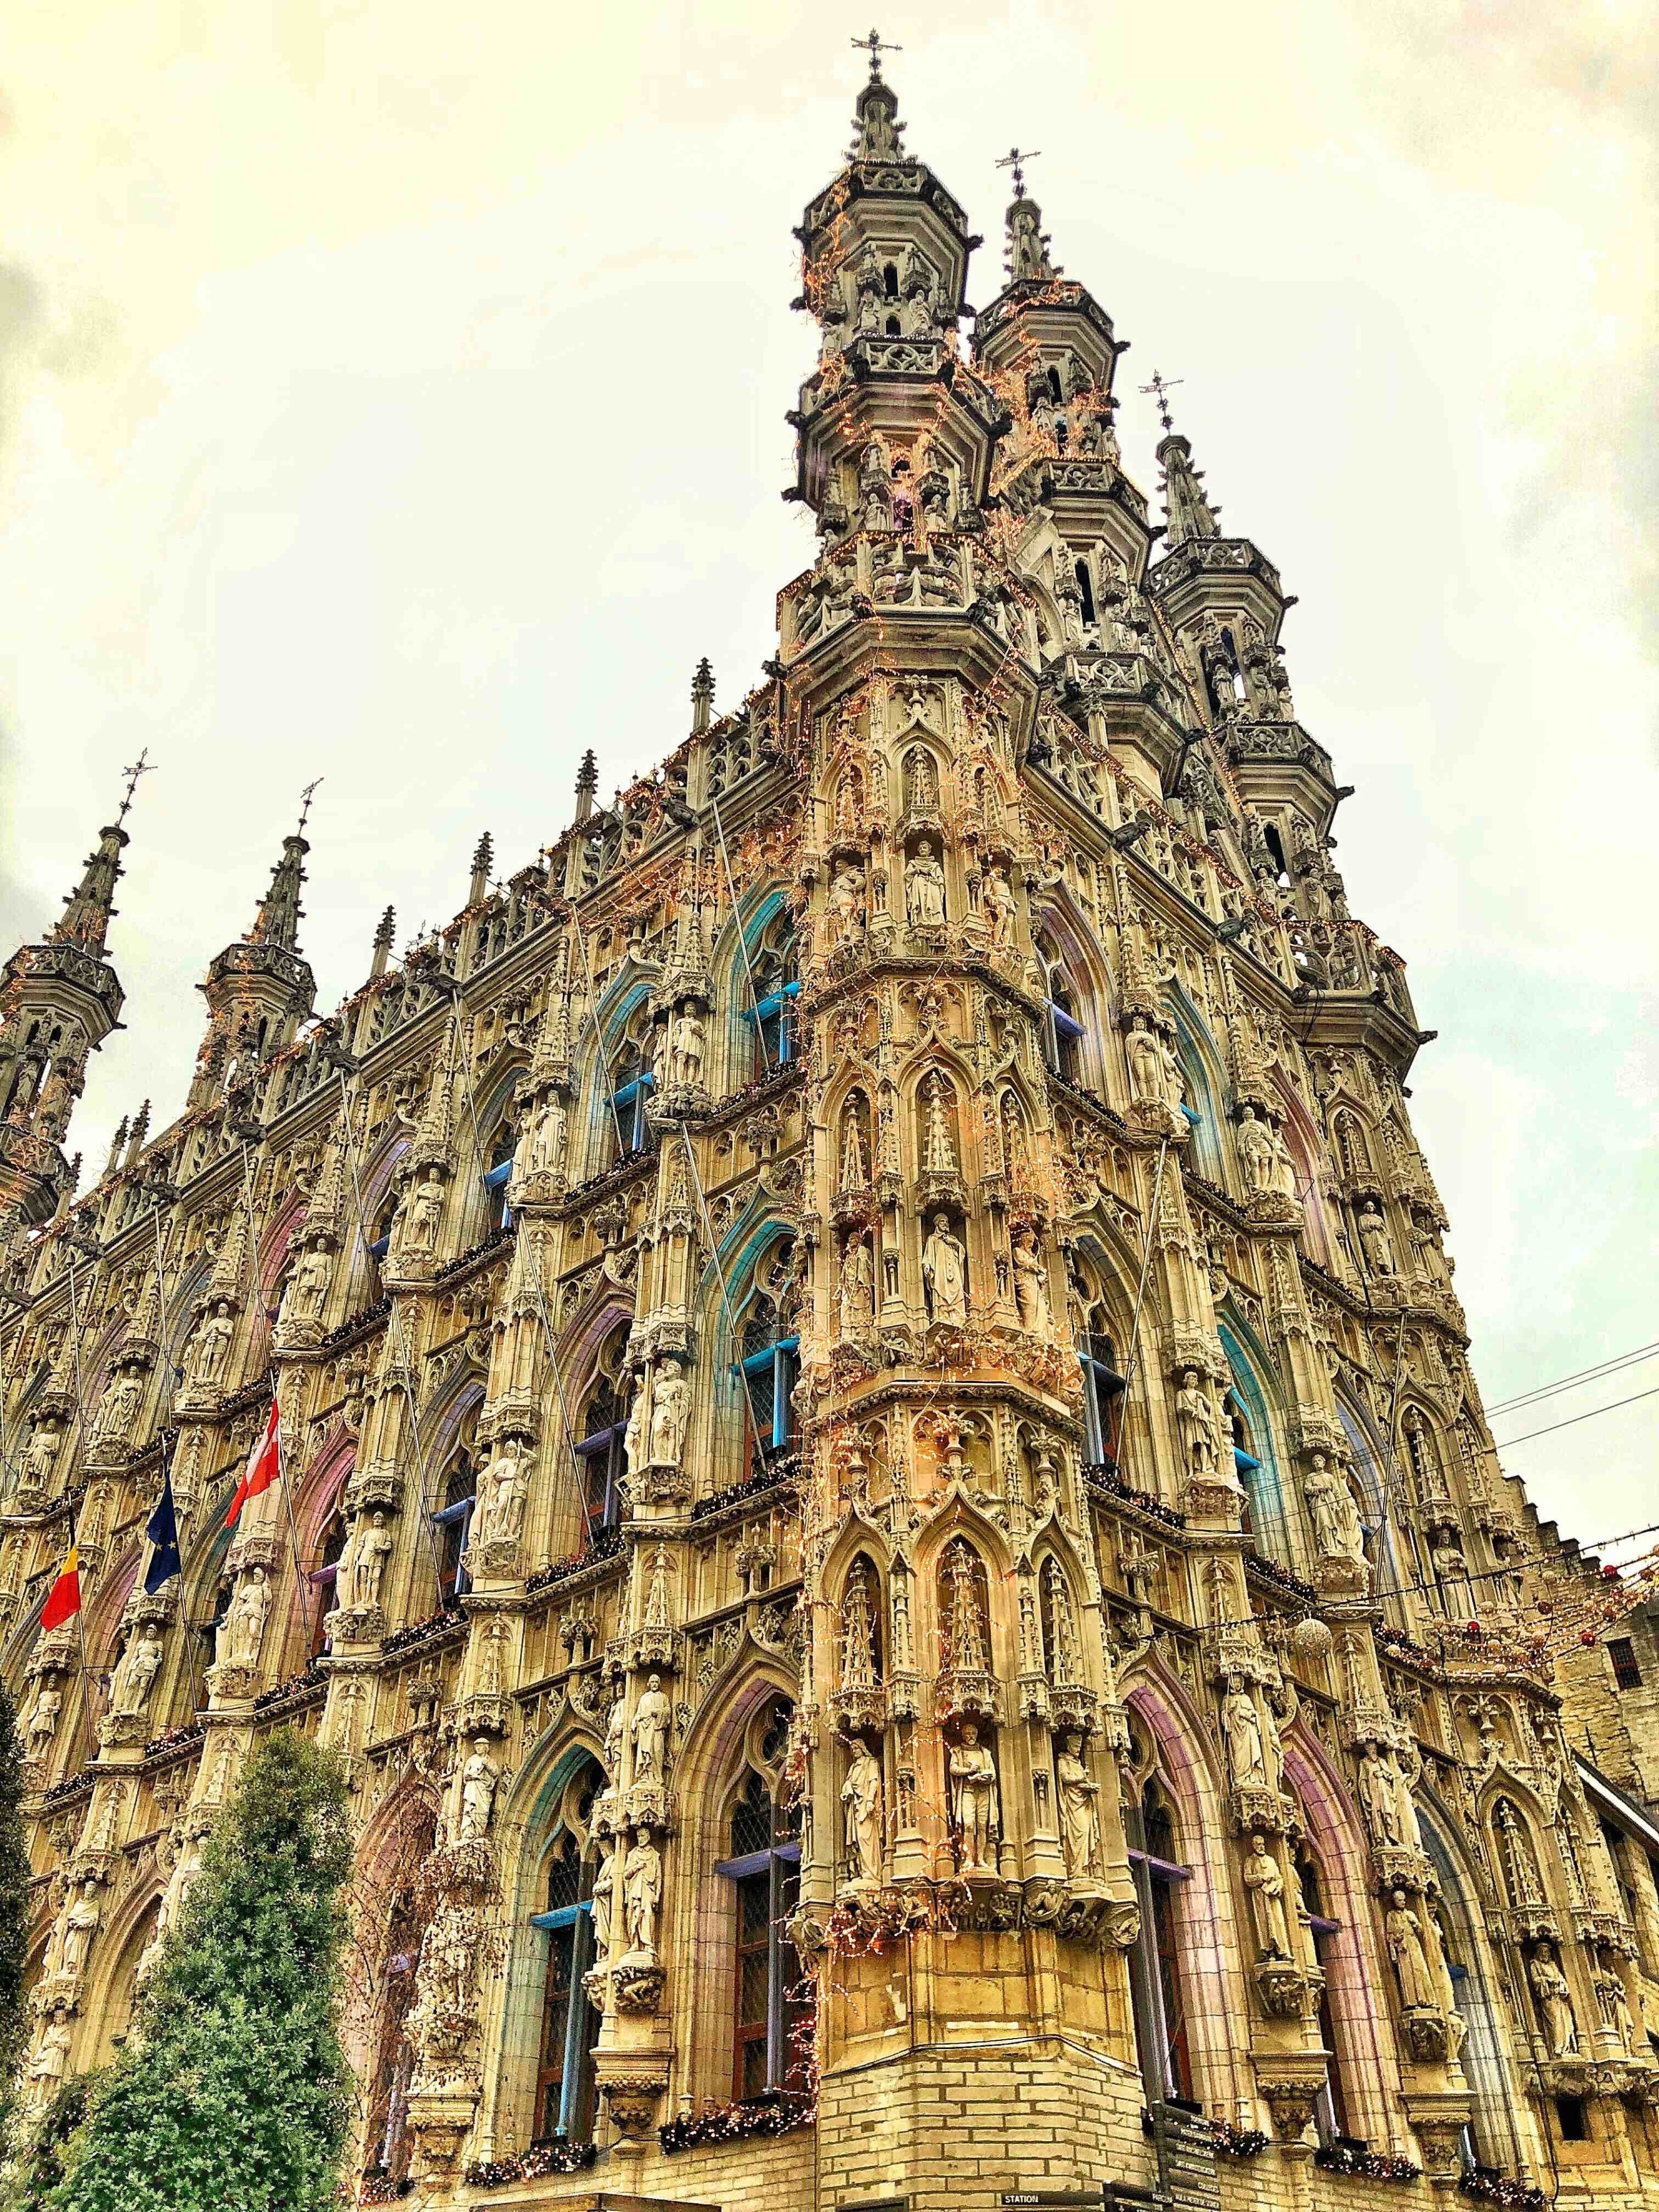 The ornate and beautiful town hall in Leuven, Belgium.